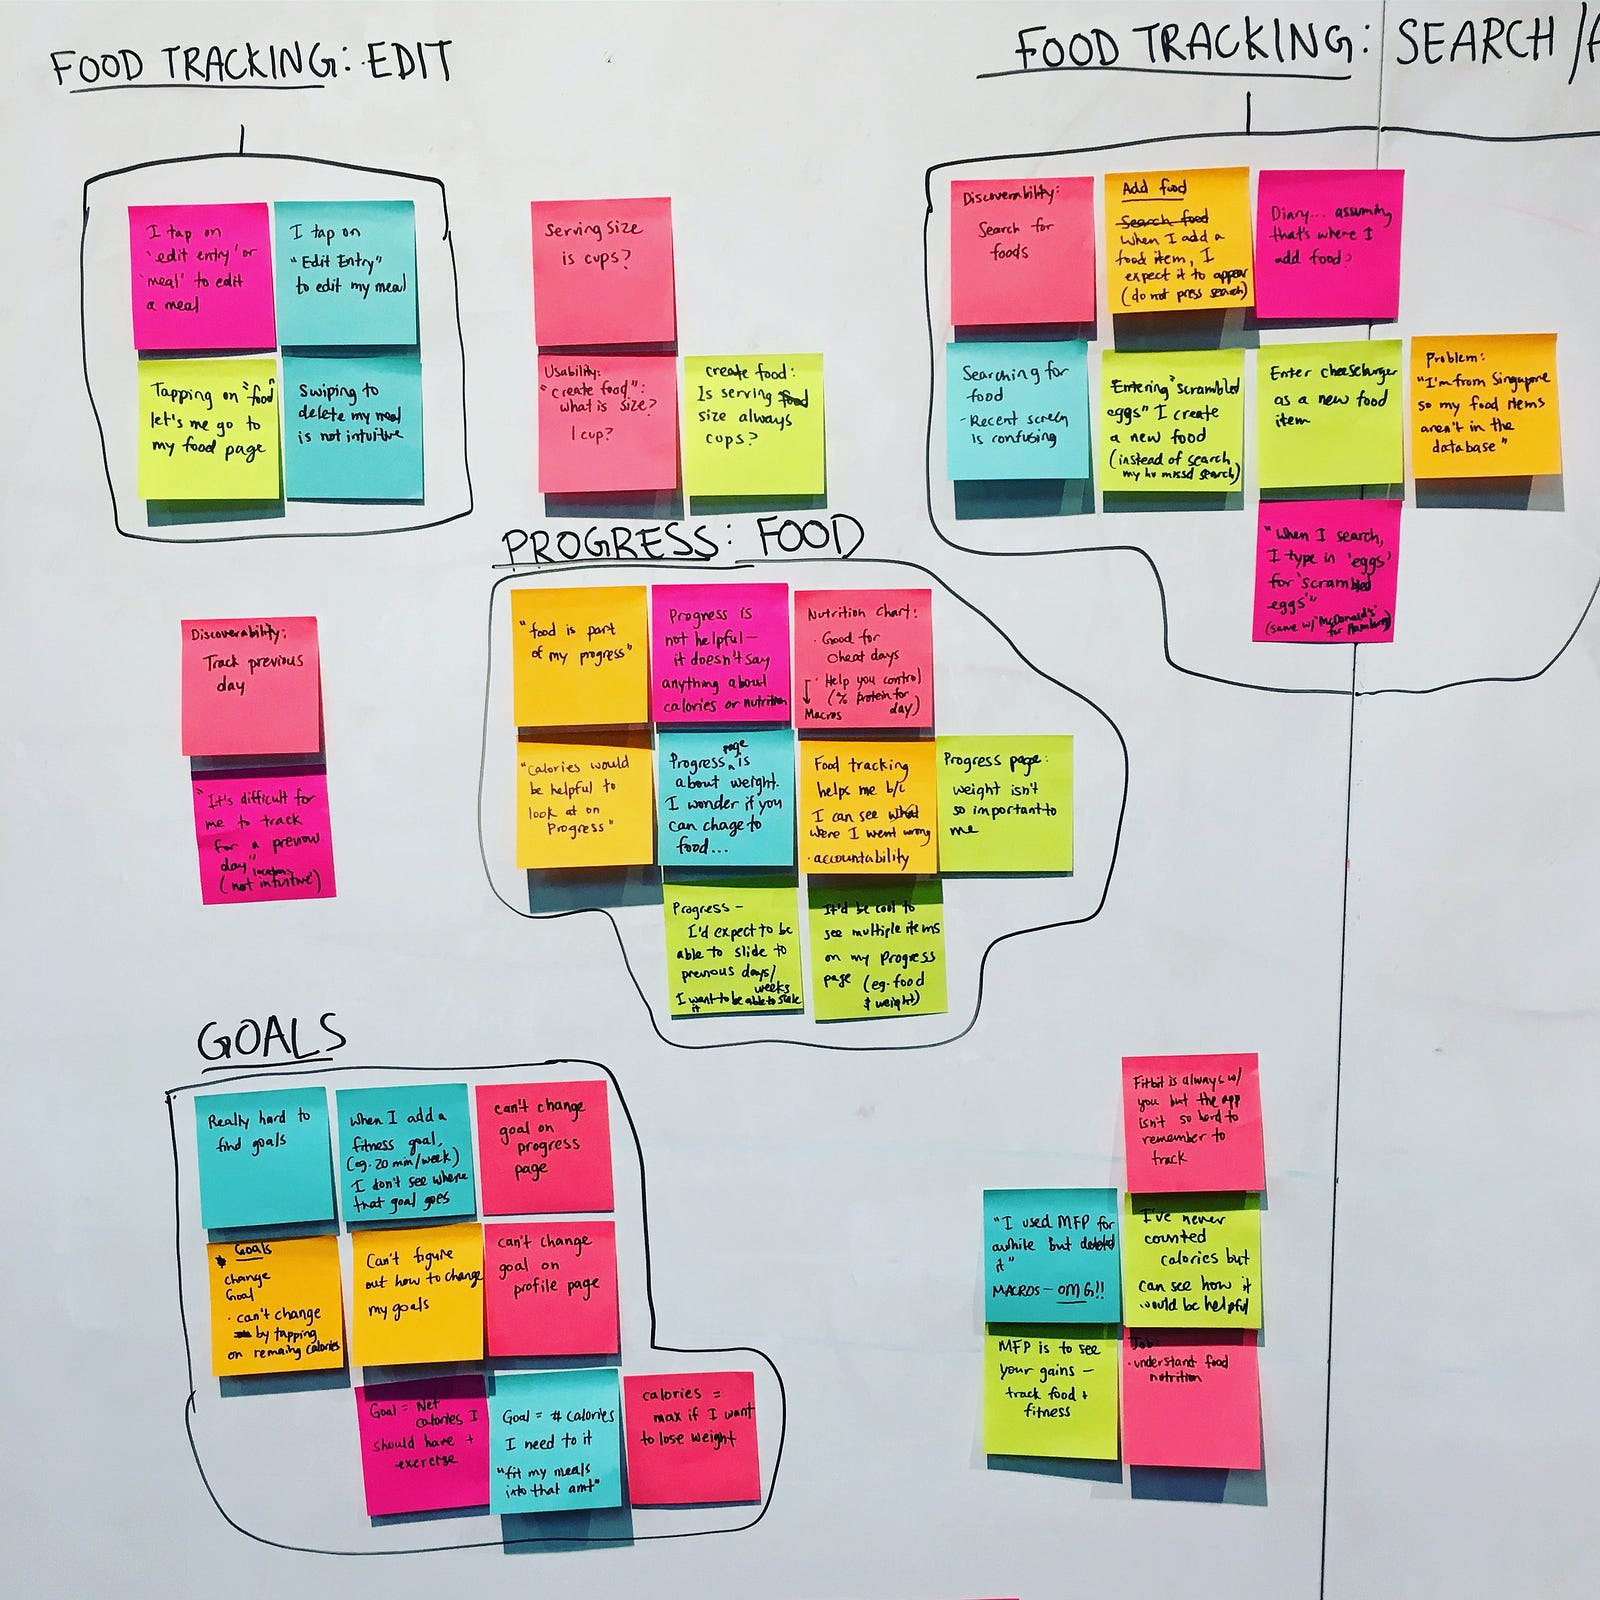 affinity mapping ux case study